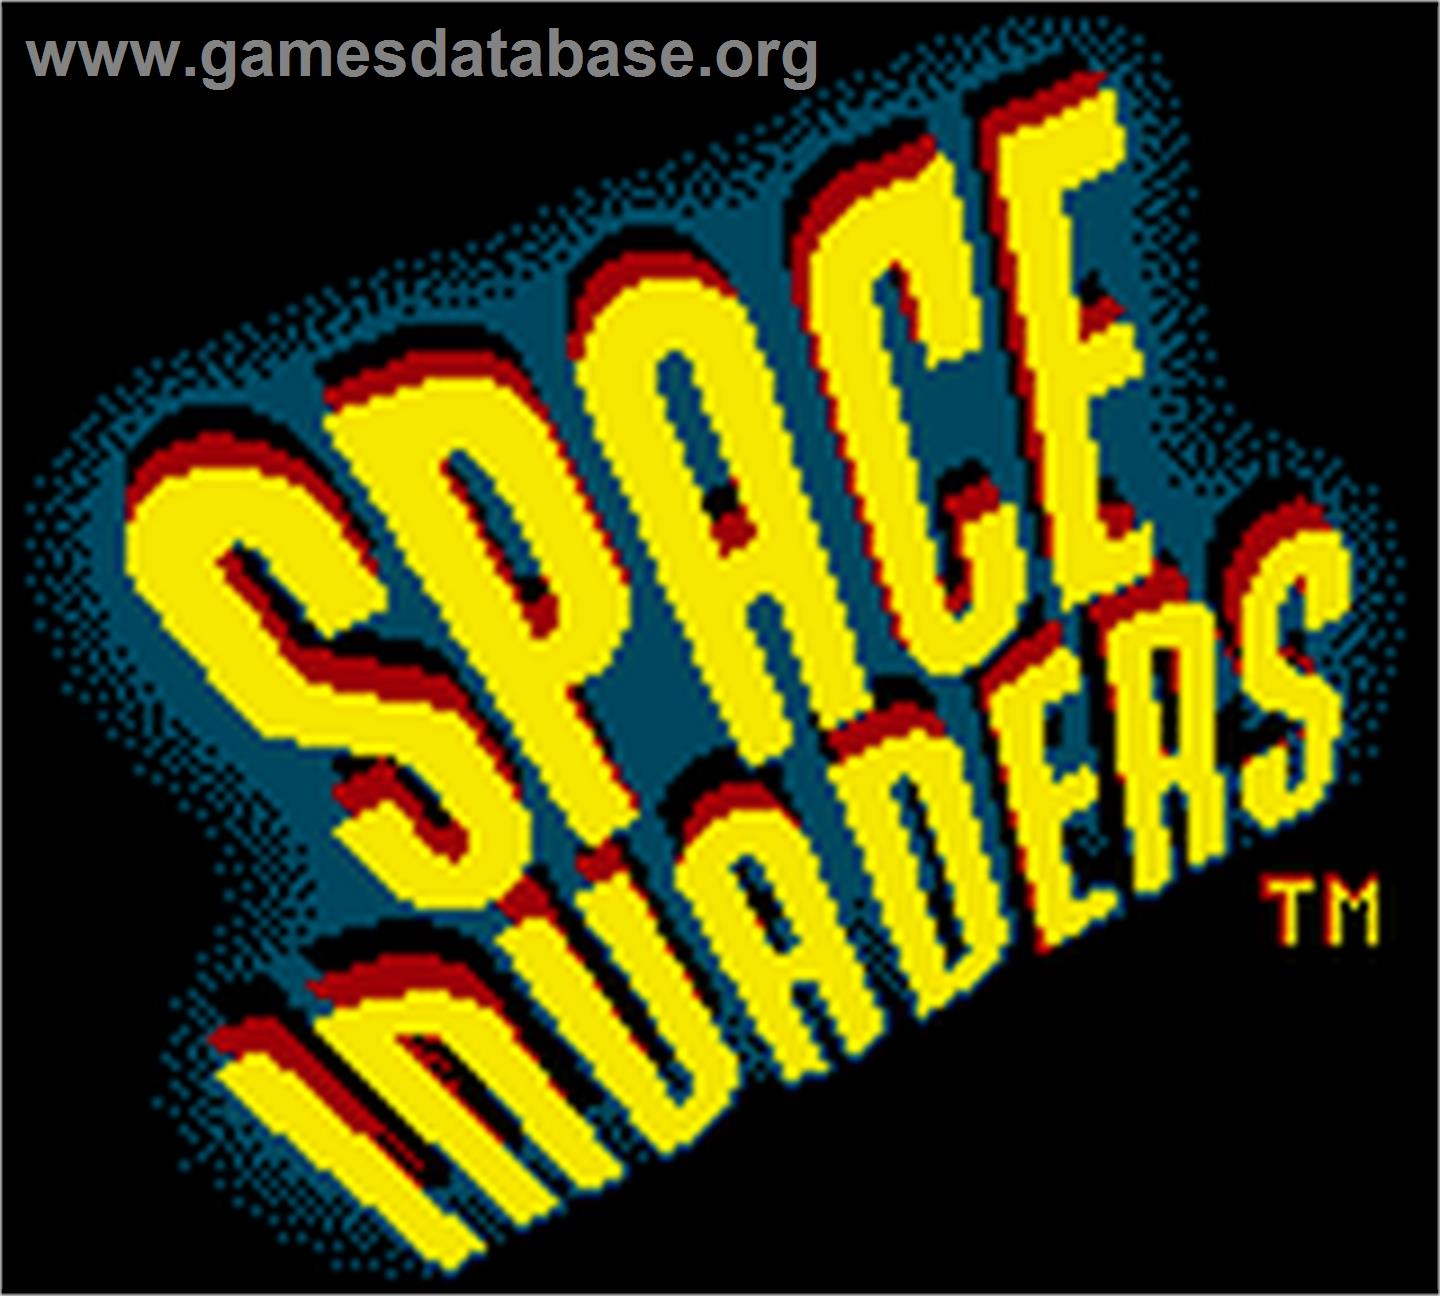 Space Invaders - Nintendo Game Boy Color - Artwork - Title Screen